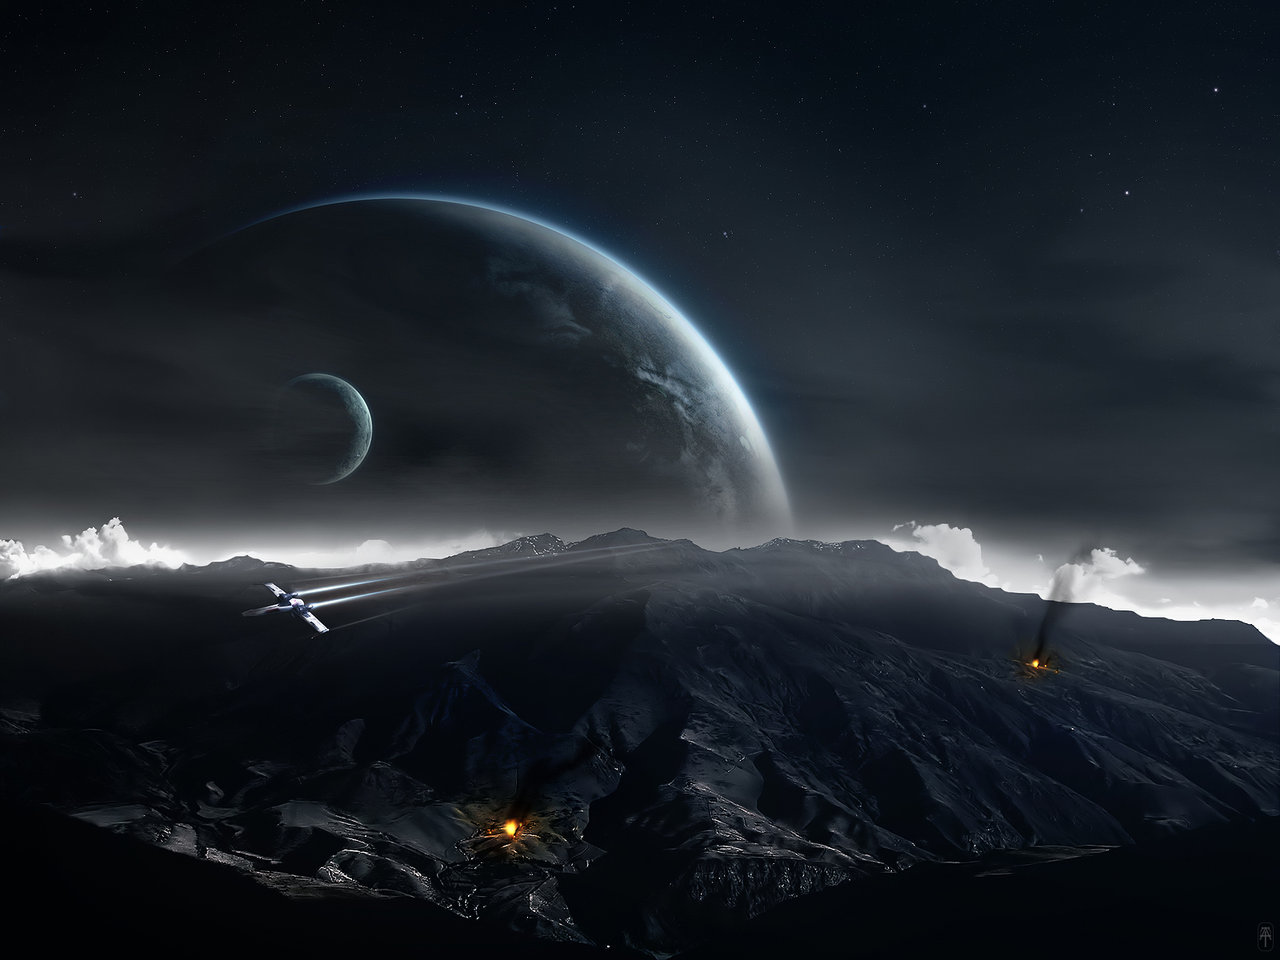  Planet Windows Backgrounds